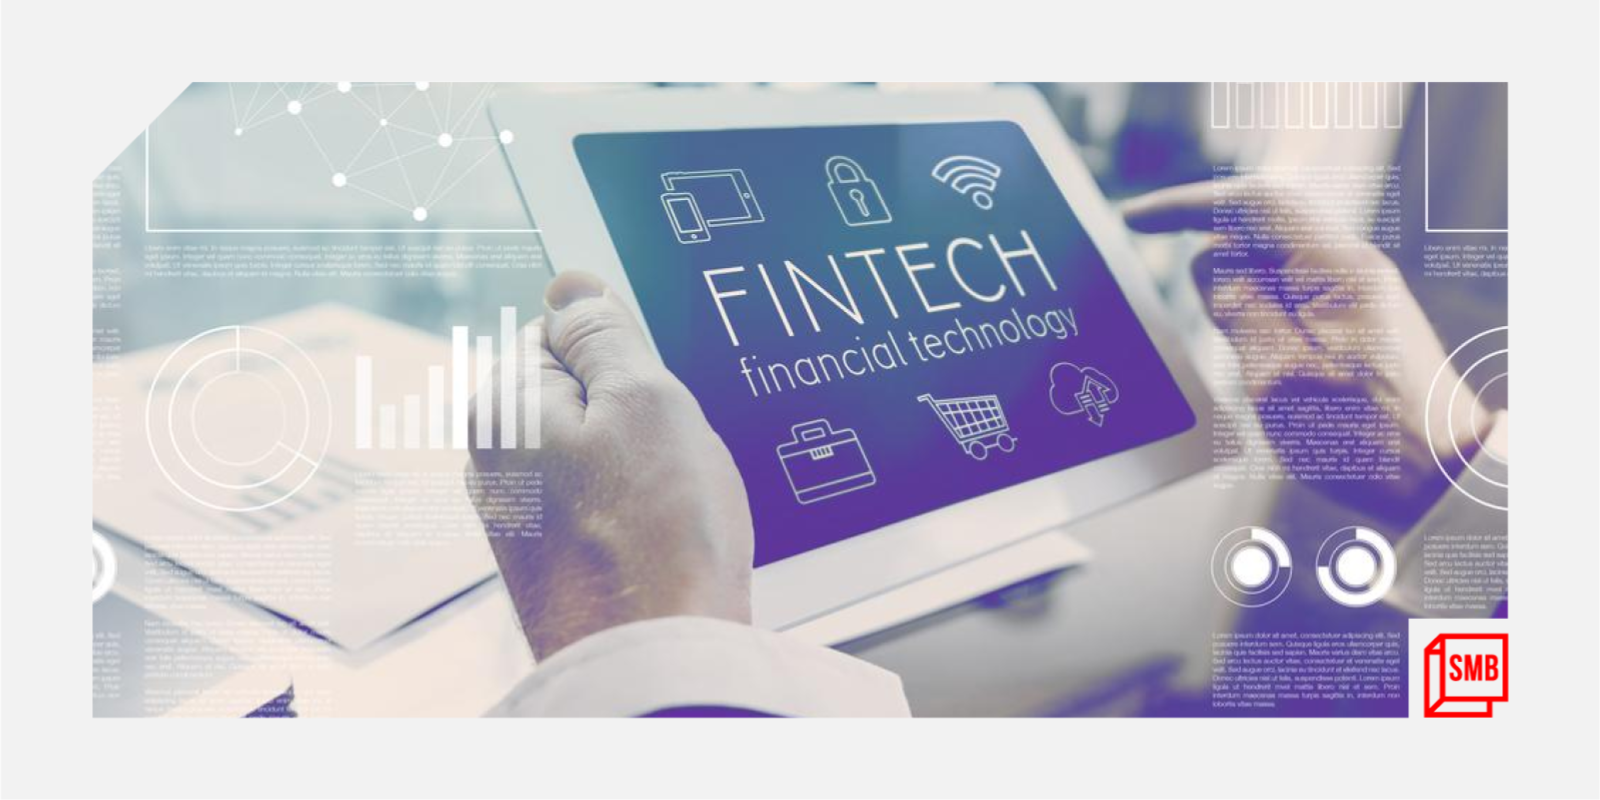 How fintech businesses are helping SMBs digitalise in the post-COVID-19 era

